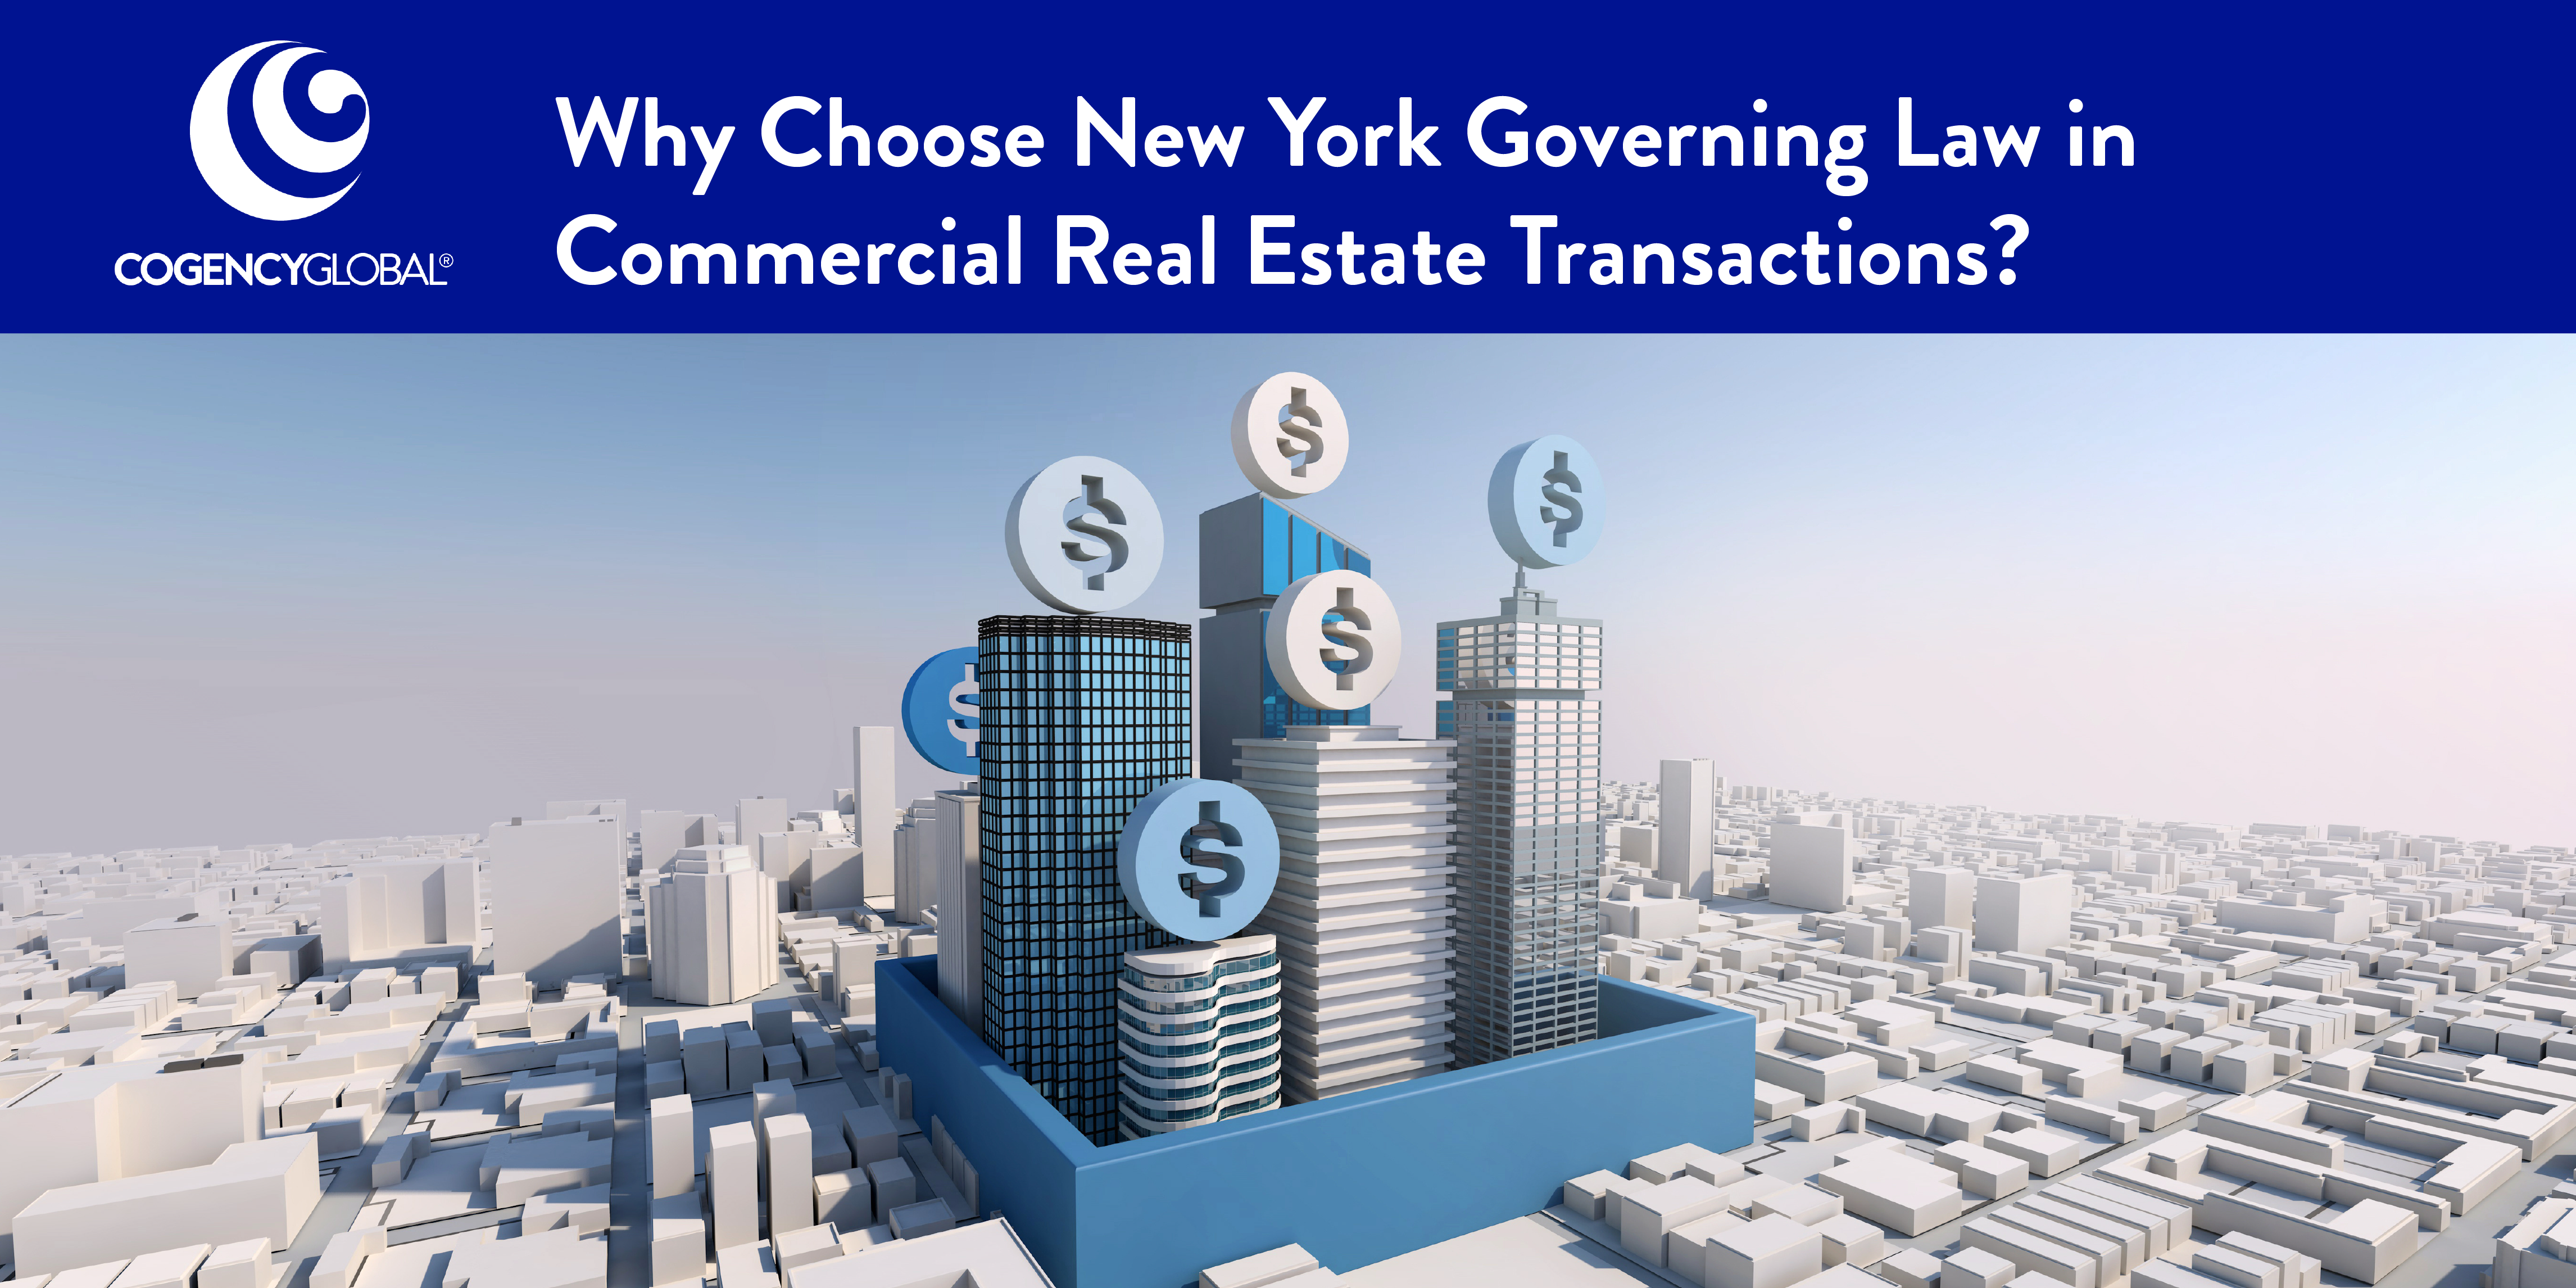 Why Choose New York Governing Law in Commercial Real Estate Transactions?